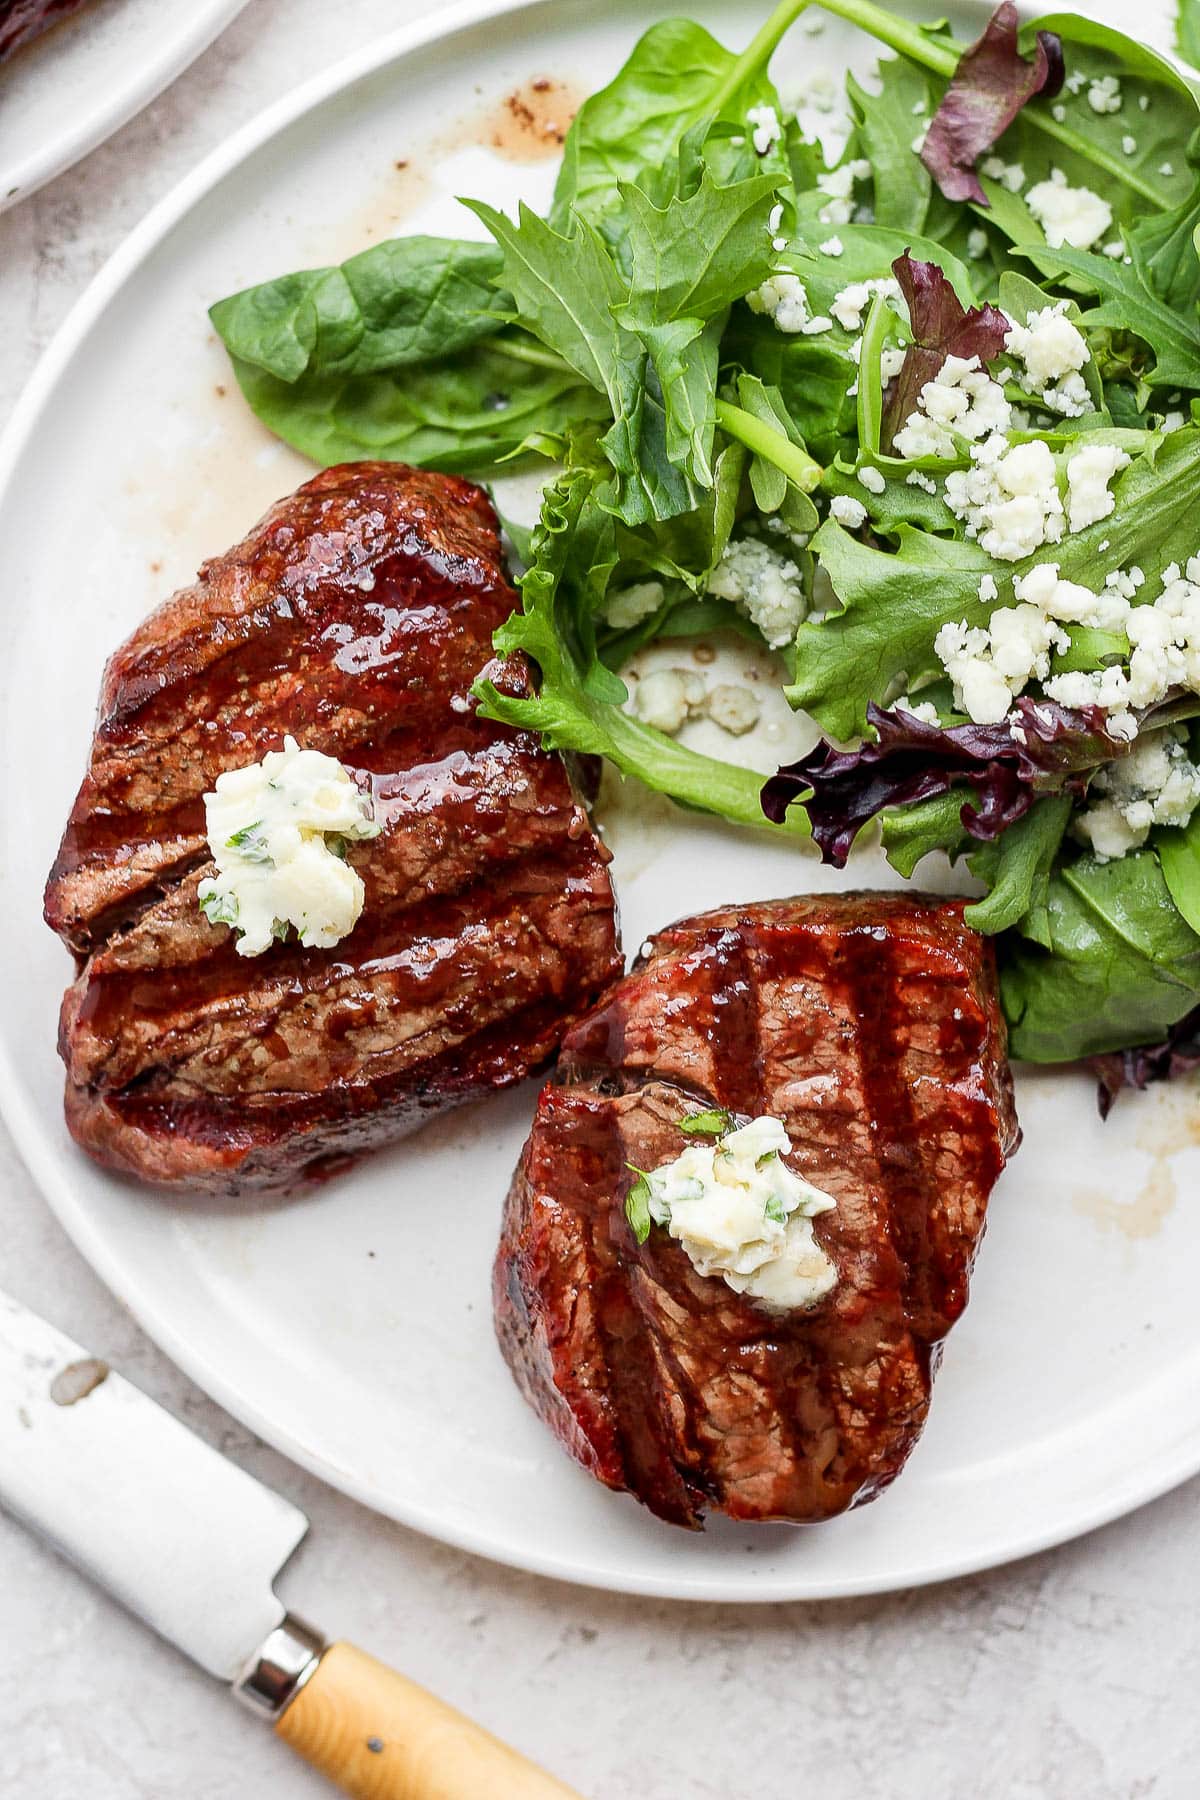 A plate with two grilled steaks and a salad. Steaks are topped with herbed butter.